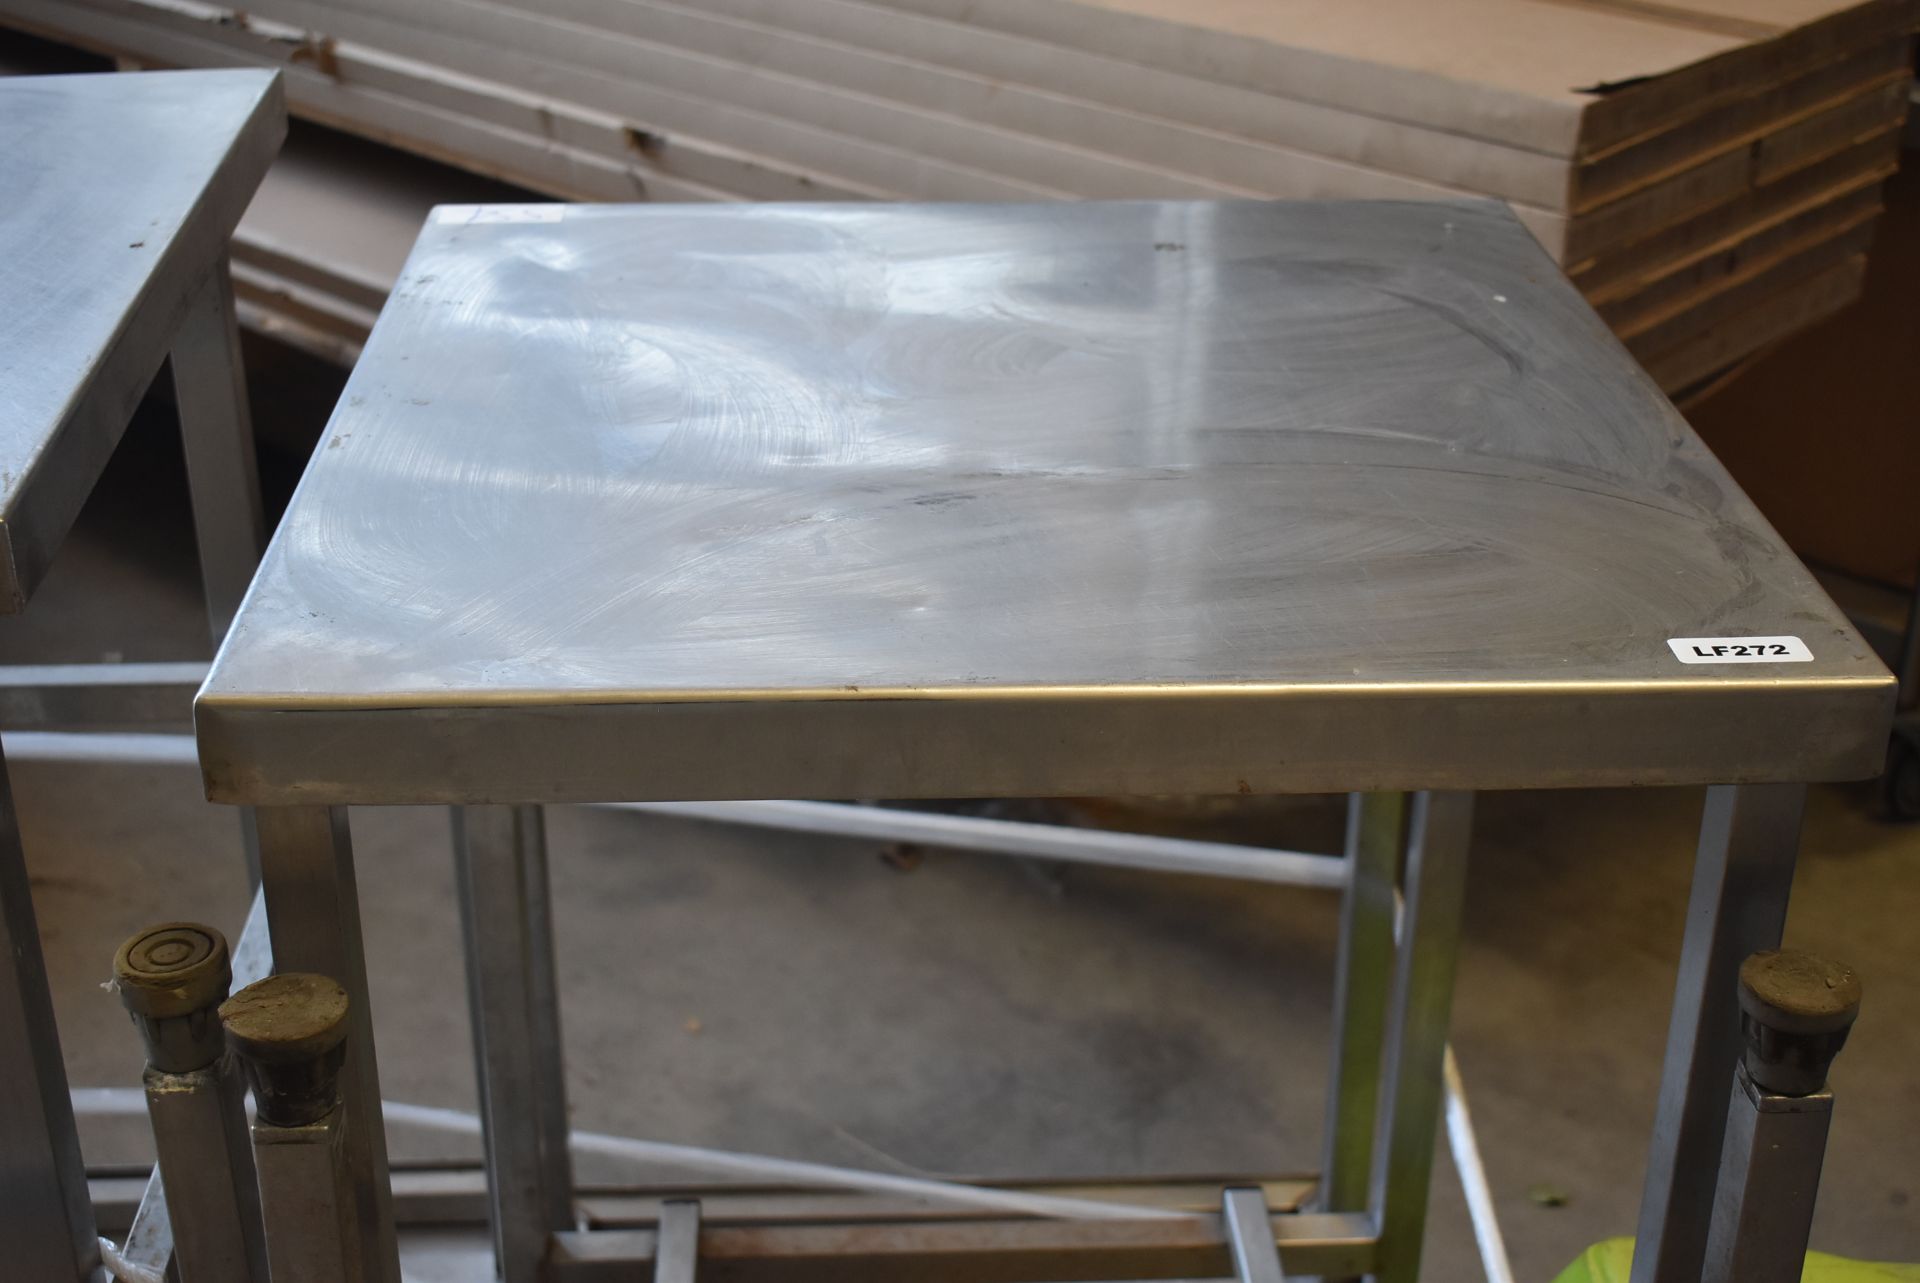 4 x Stainless Steel prep Tables - Sizes Include 46x76cm, 61x61cm and 96x36cm - CL282 - Ref LF272 A4D - Image 4 of 5